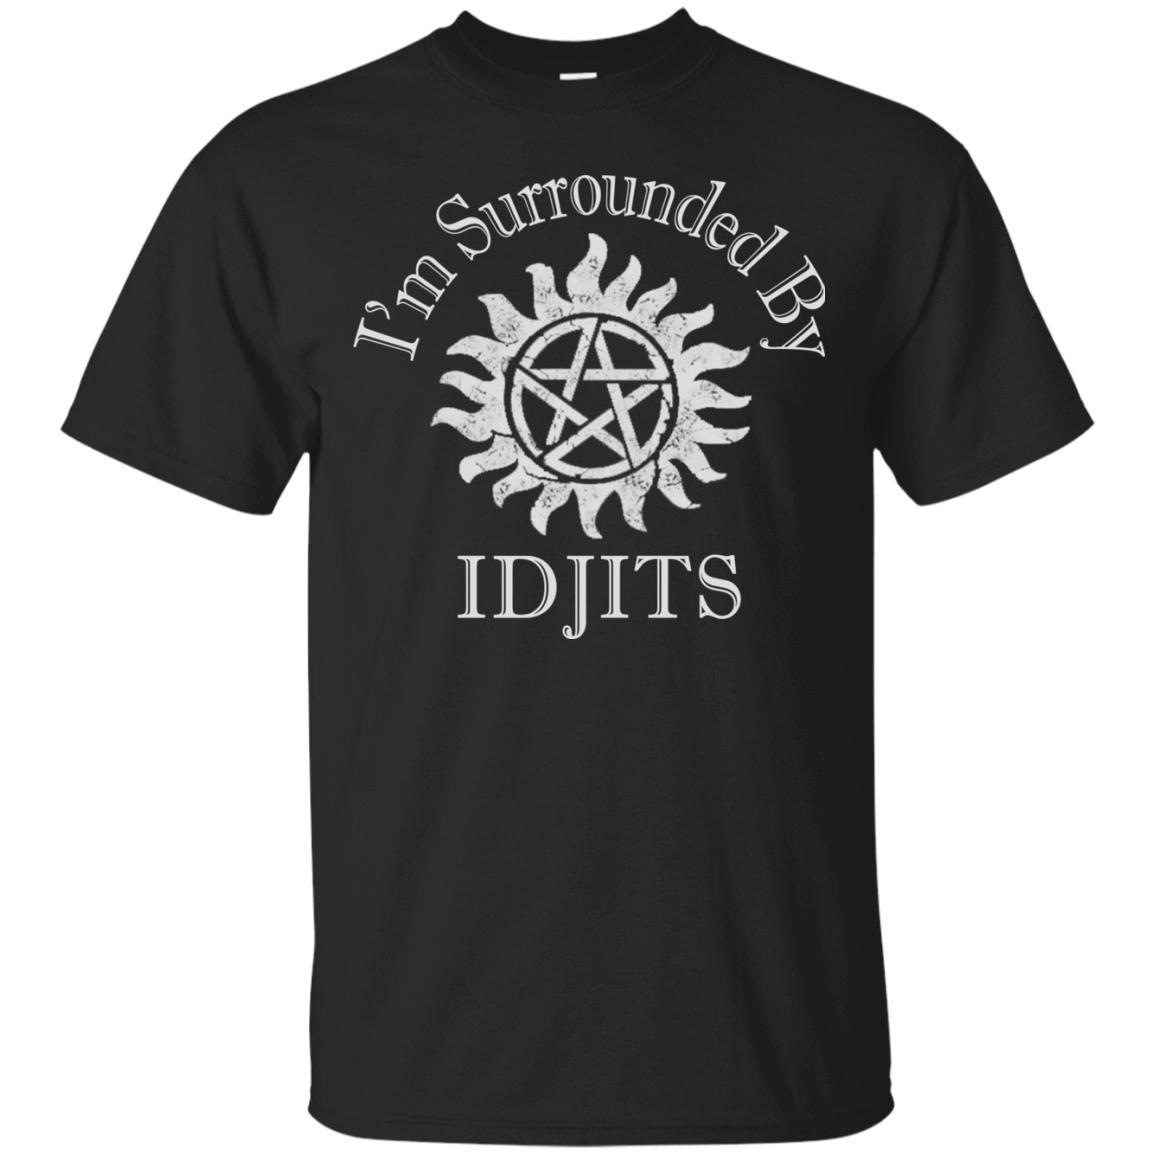 Surrounded By Idjits Shirt